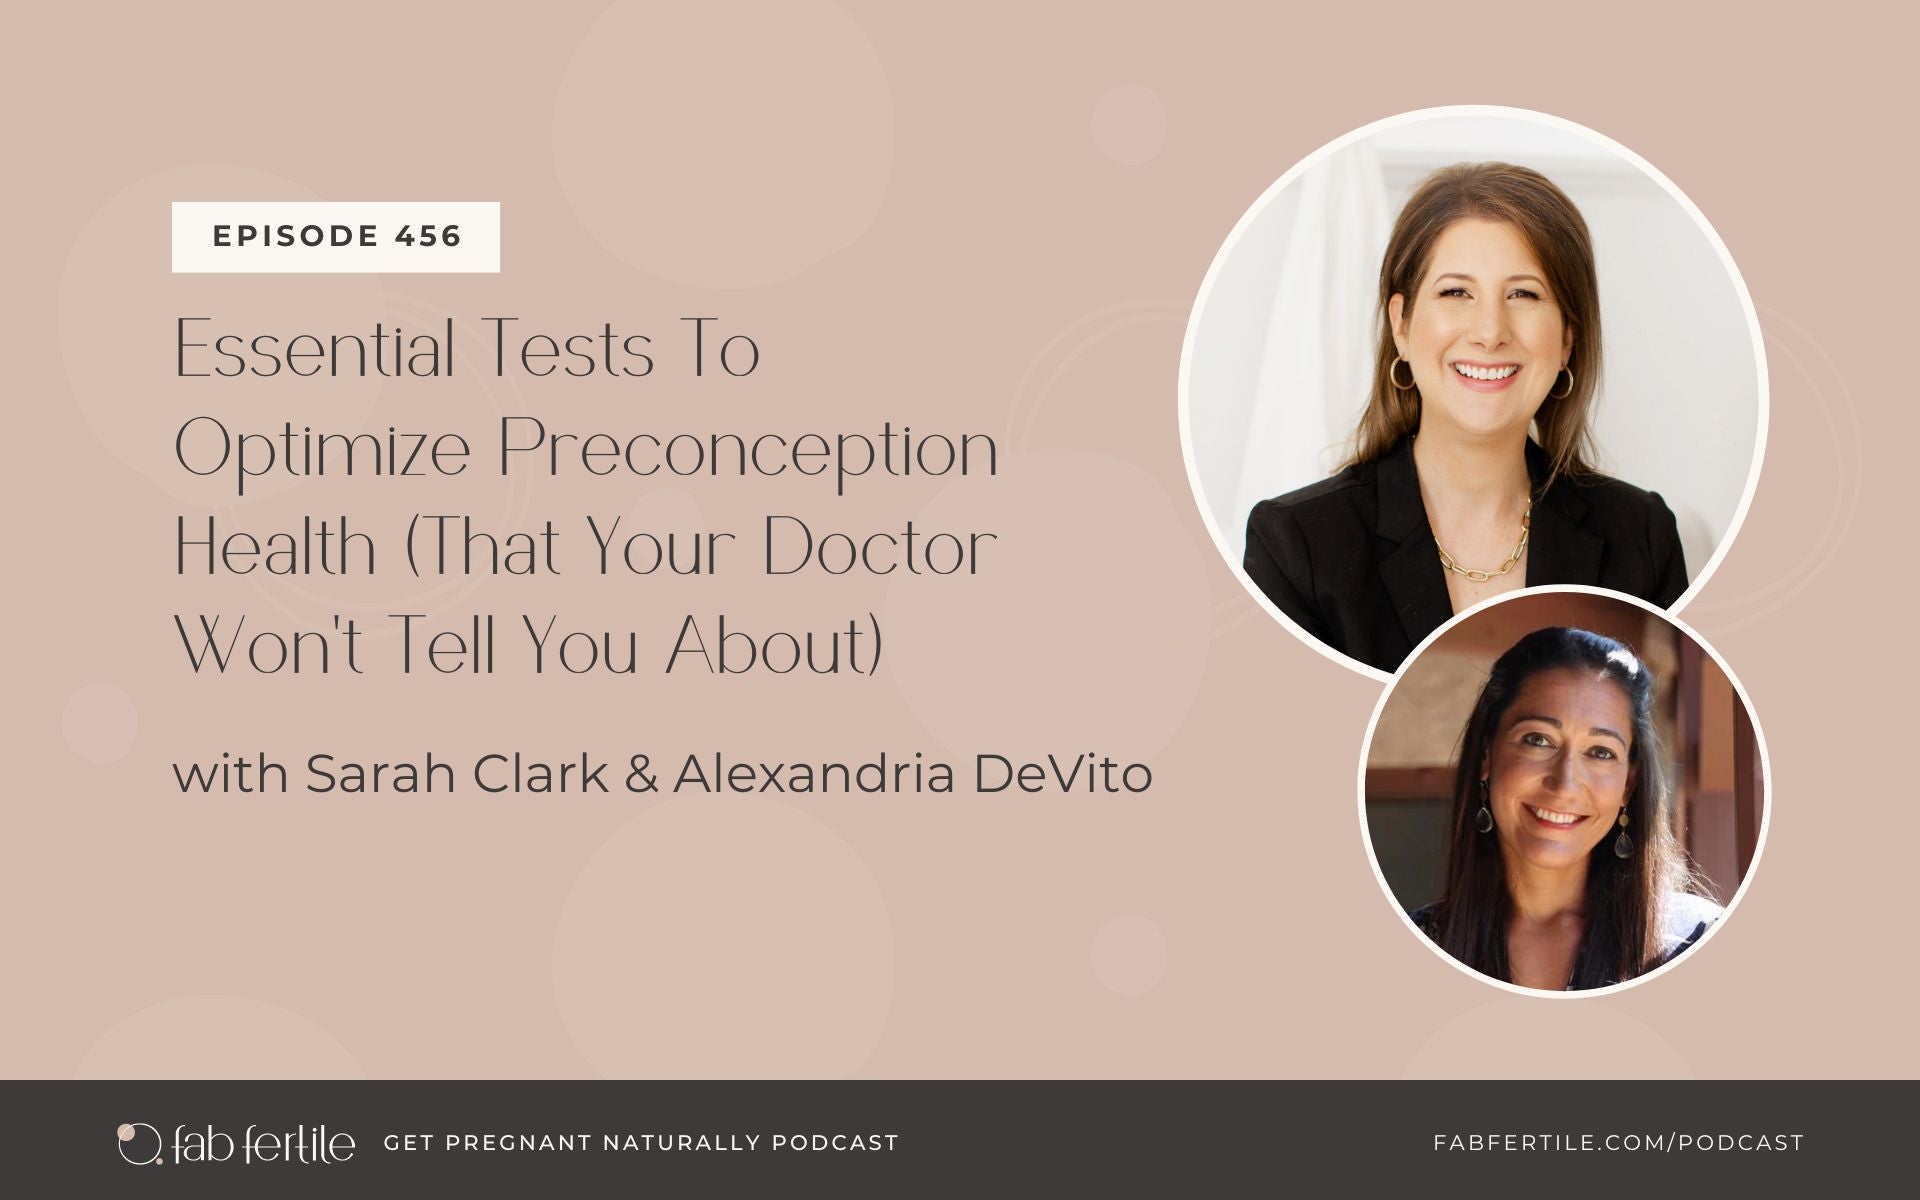 Essential Tests To Optimize Preconception Health (That Your Doctor Won't Tell You About) with Alexandria DeVito